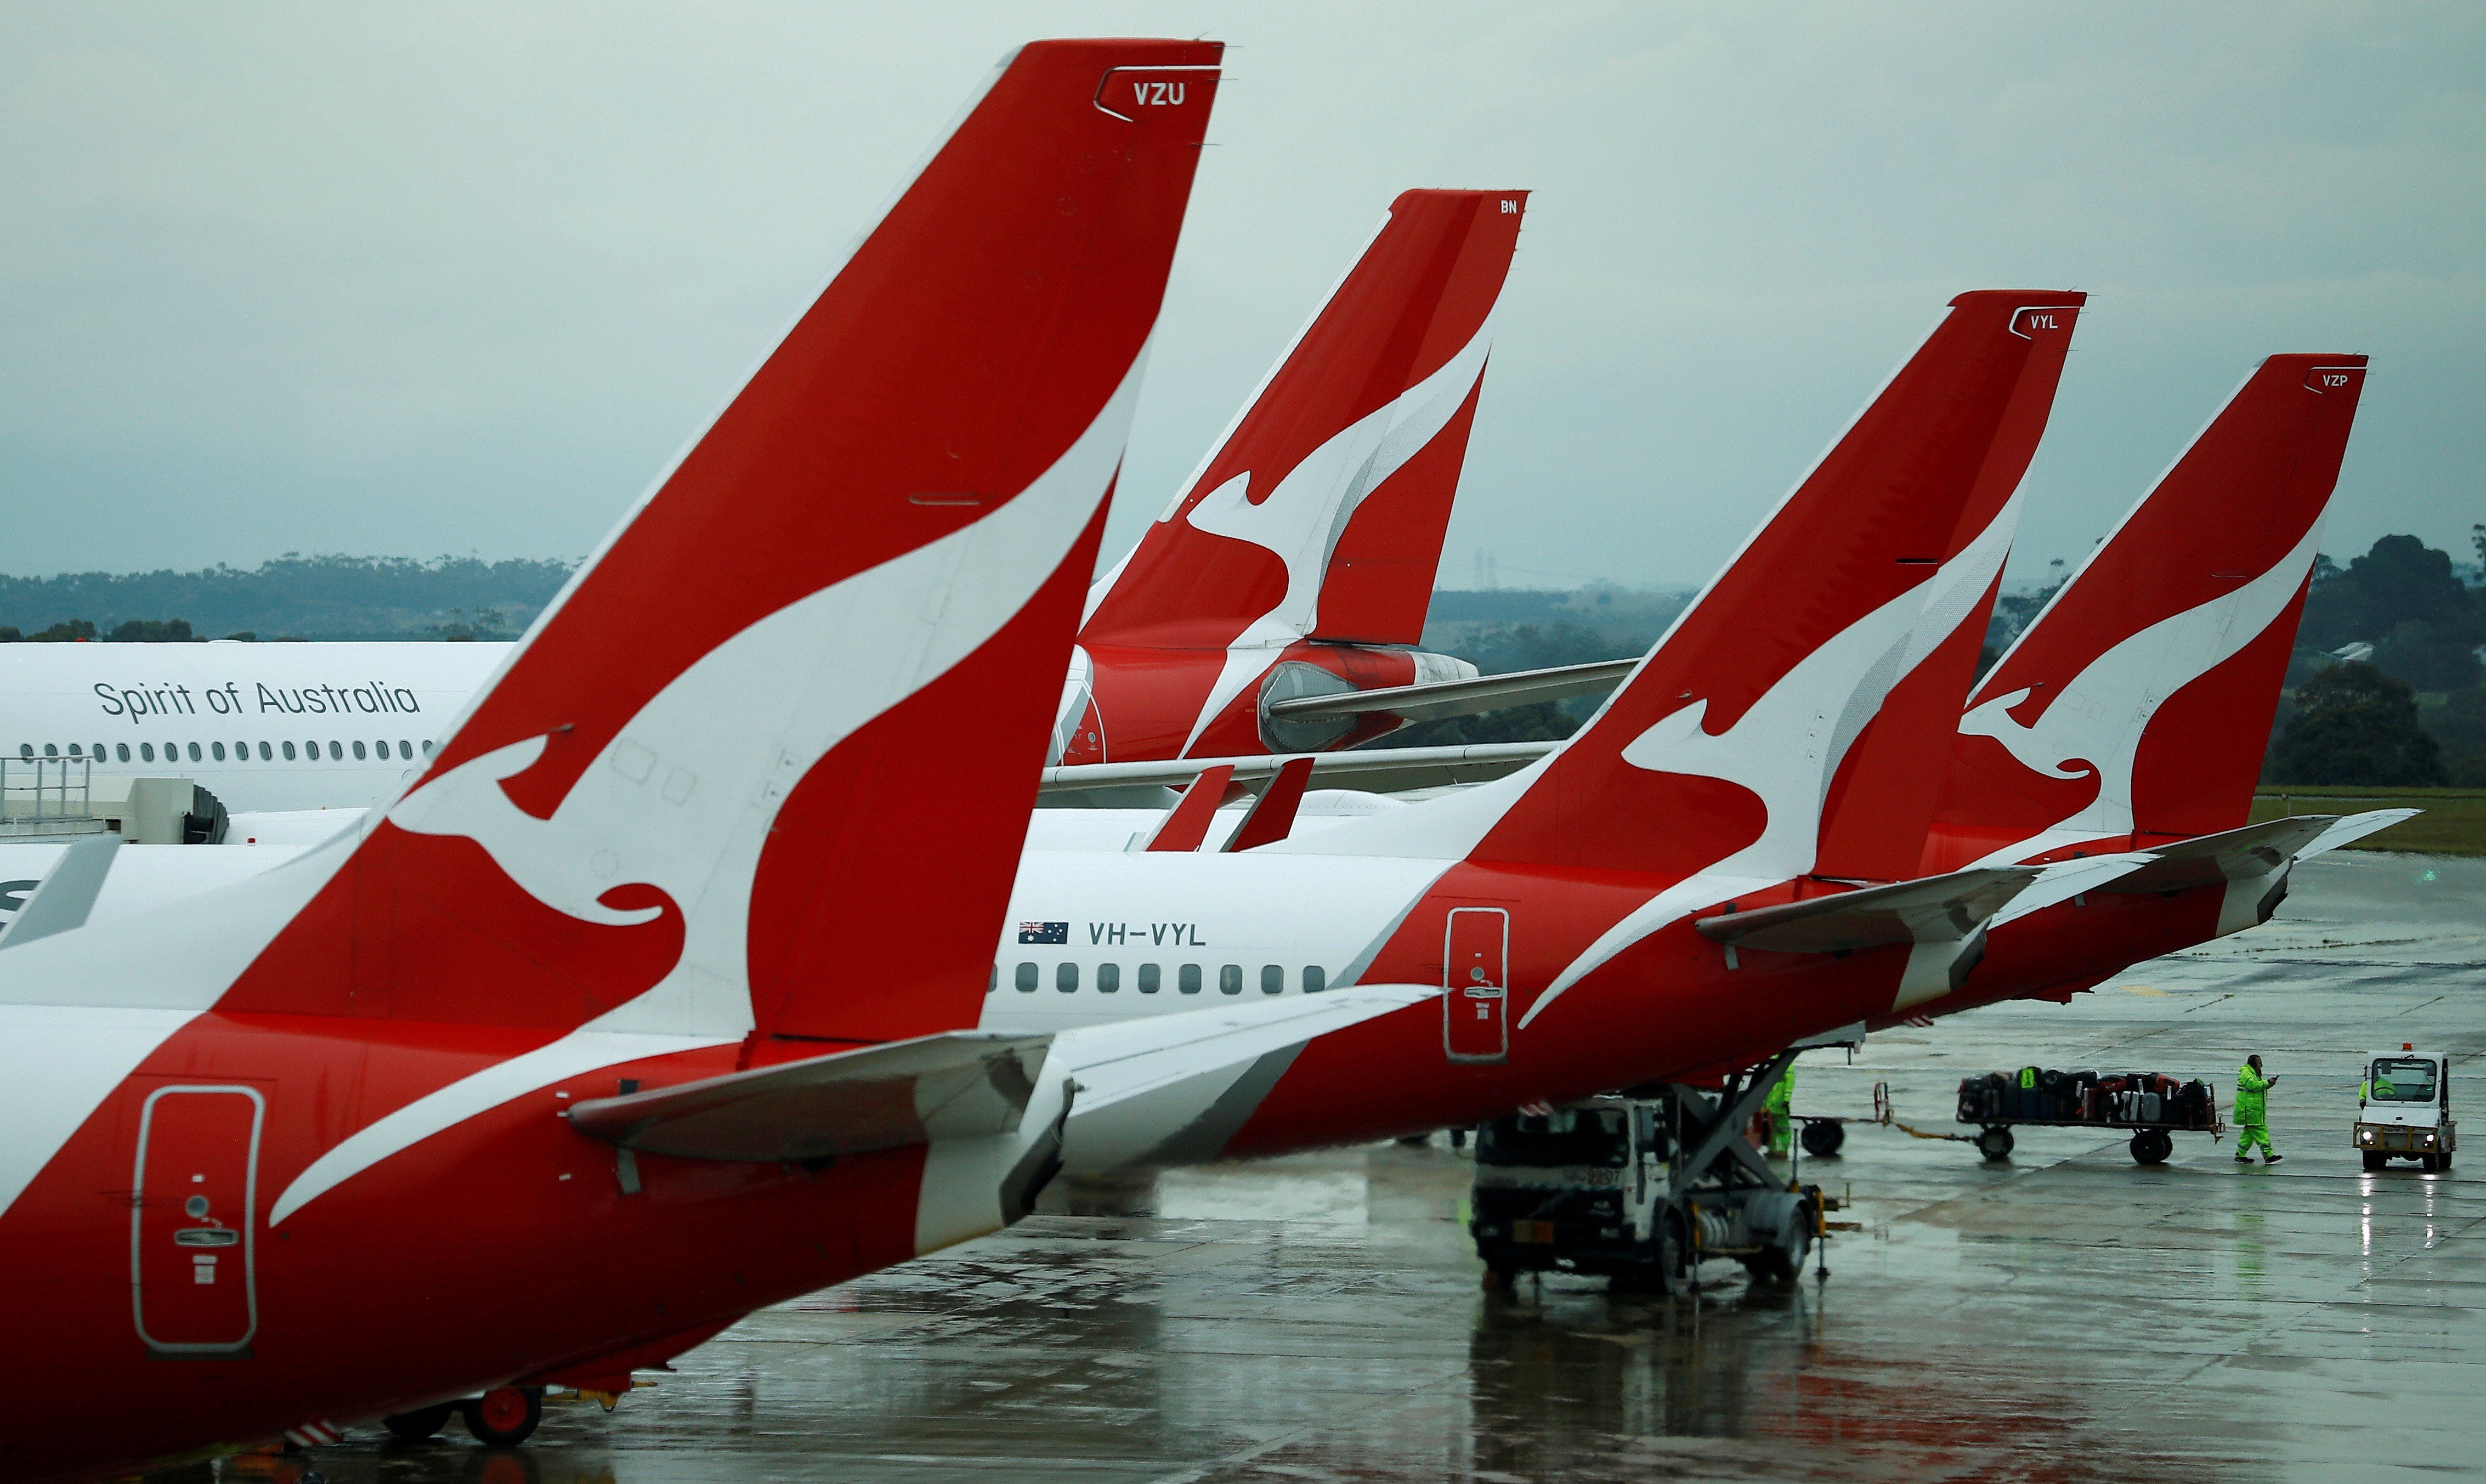 Qantas aircraft, pictured in Melbourne, would fly direct to places such as London if Qantas follows through with Project Sunrise. Photo: Reuters